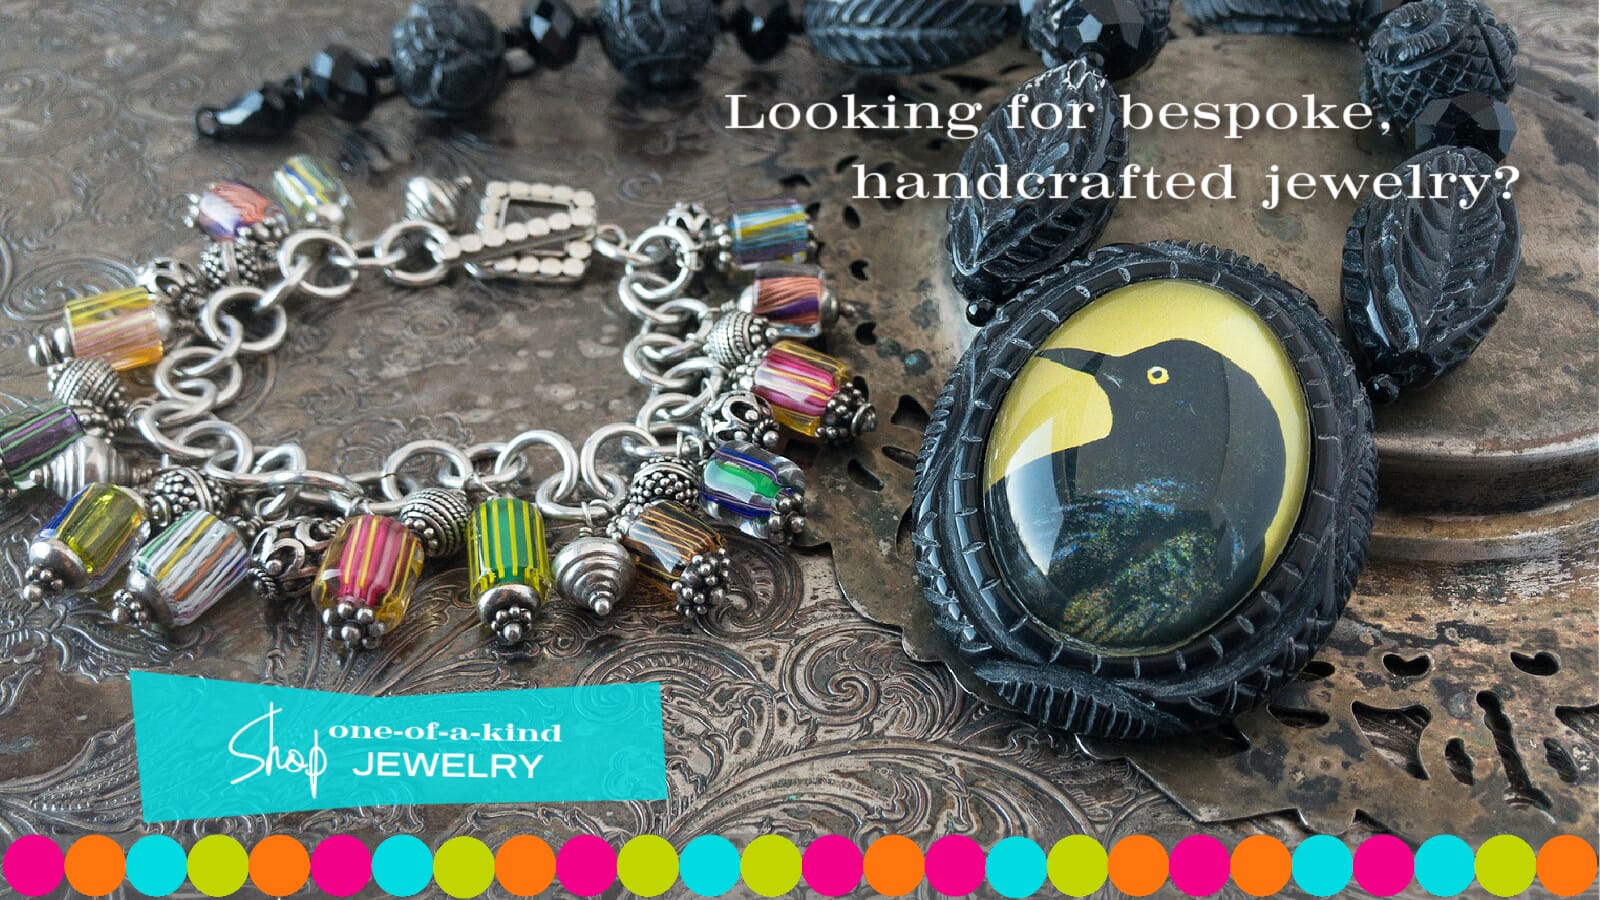 If you’re passionate about being unique, then you’ve come to the right place! Suzie Q Studio is your destination online jewellery store carrying unique, often one-of-a-kind jewelry.